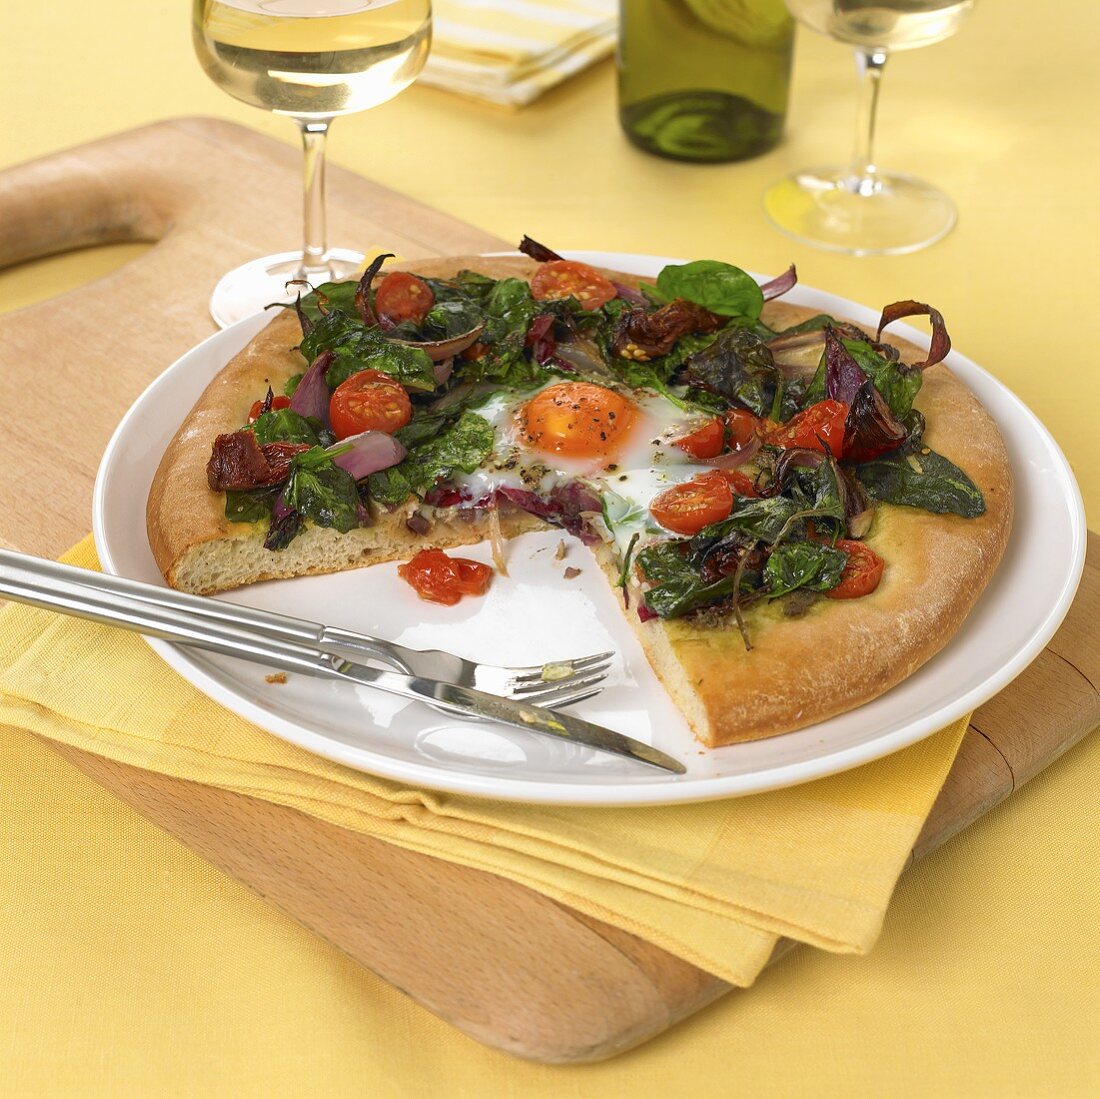 Pizza topped with fried egg, spinach, cherry tomatoes and onions